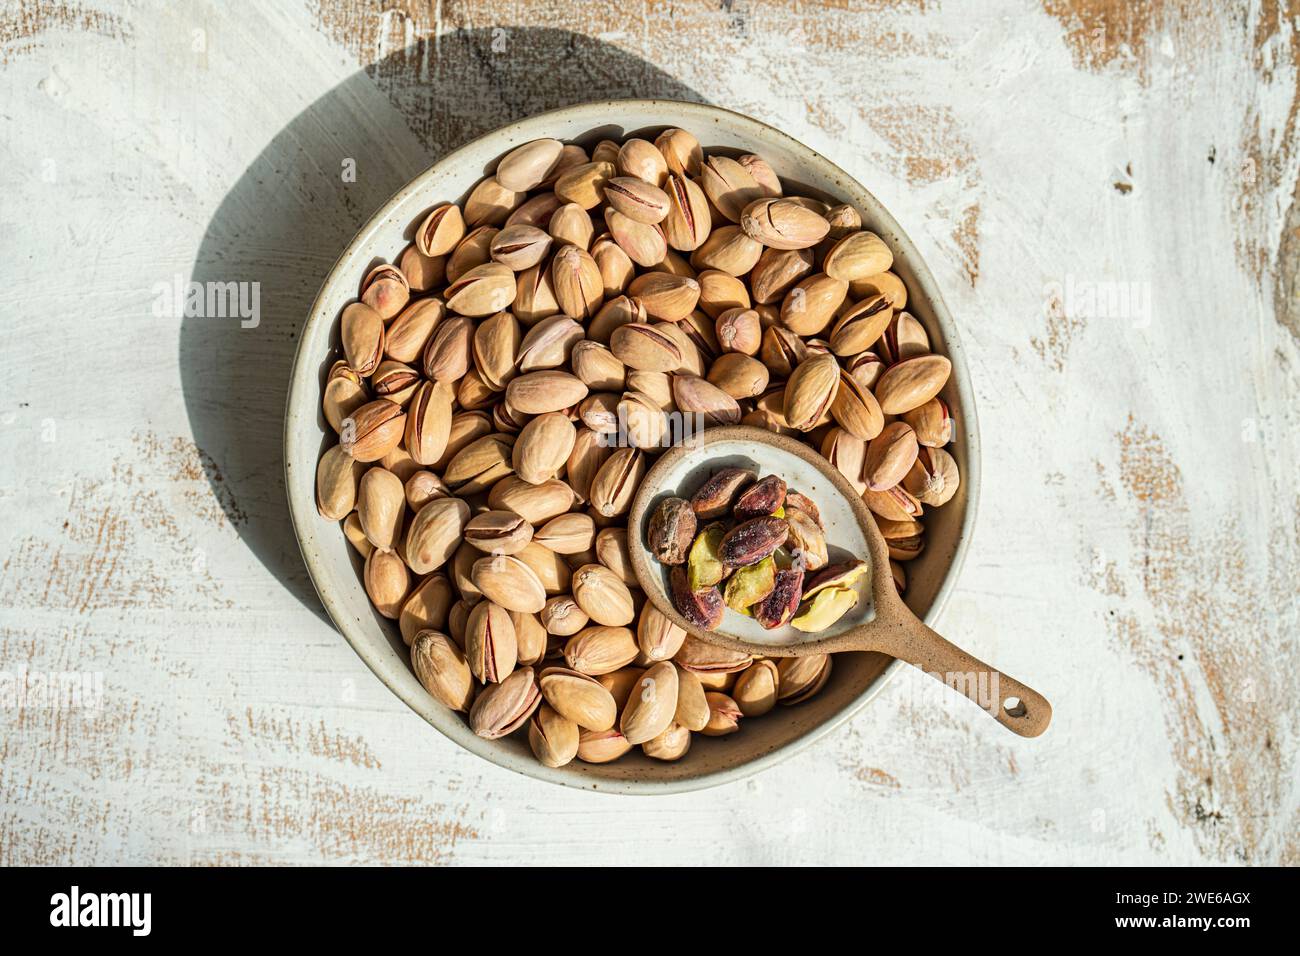 Organic pistachios in a ceramic bowl on a rustic wooden table Stock Photo